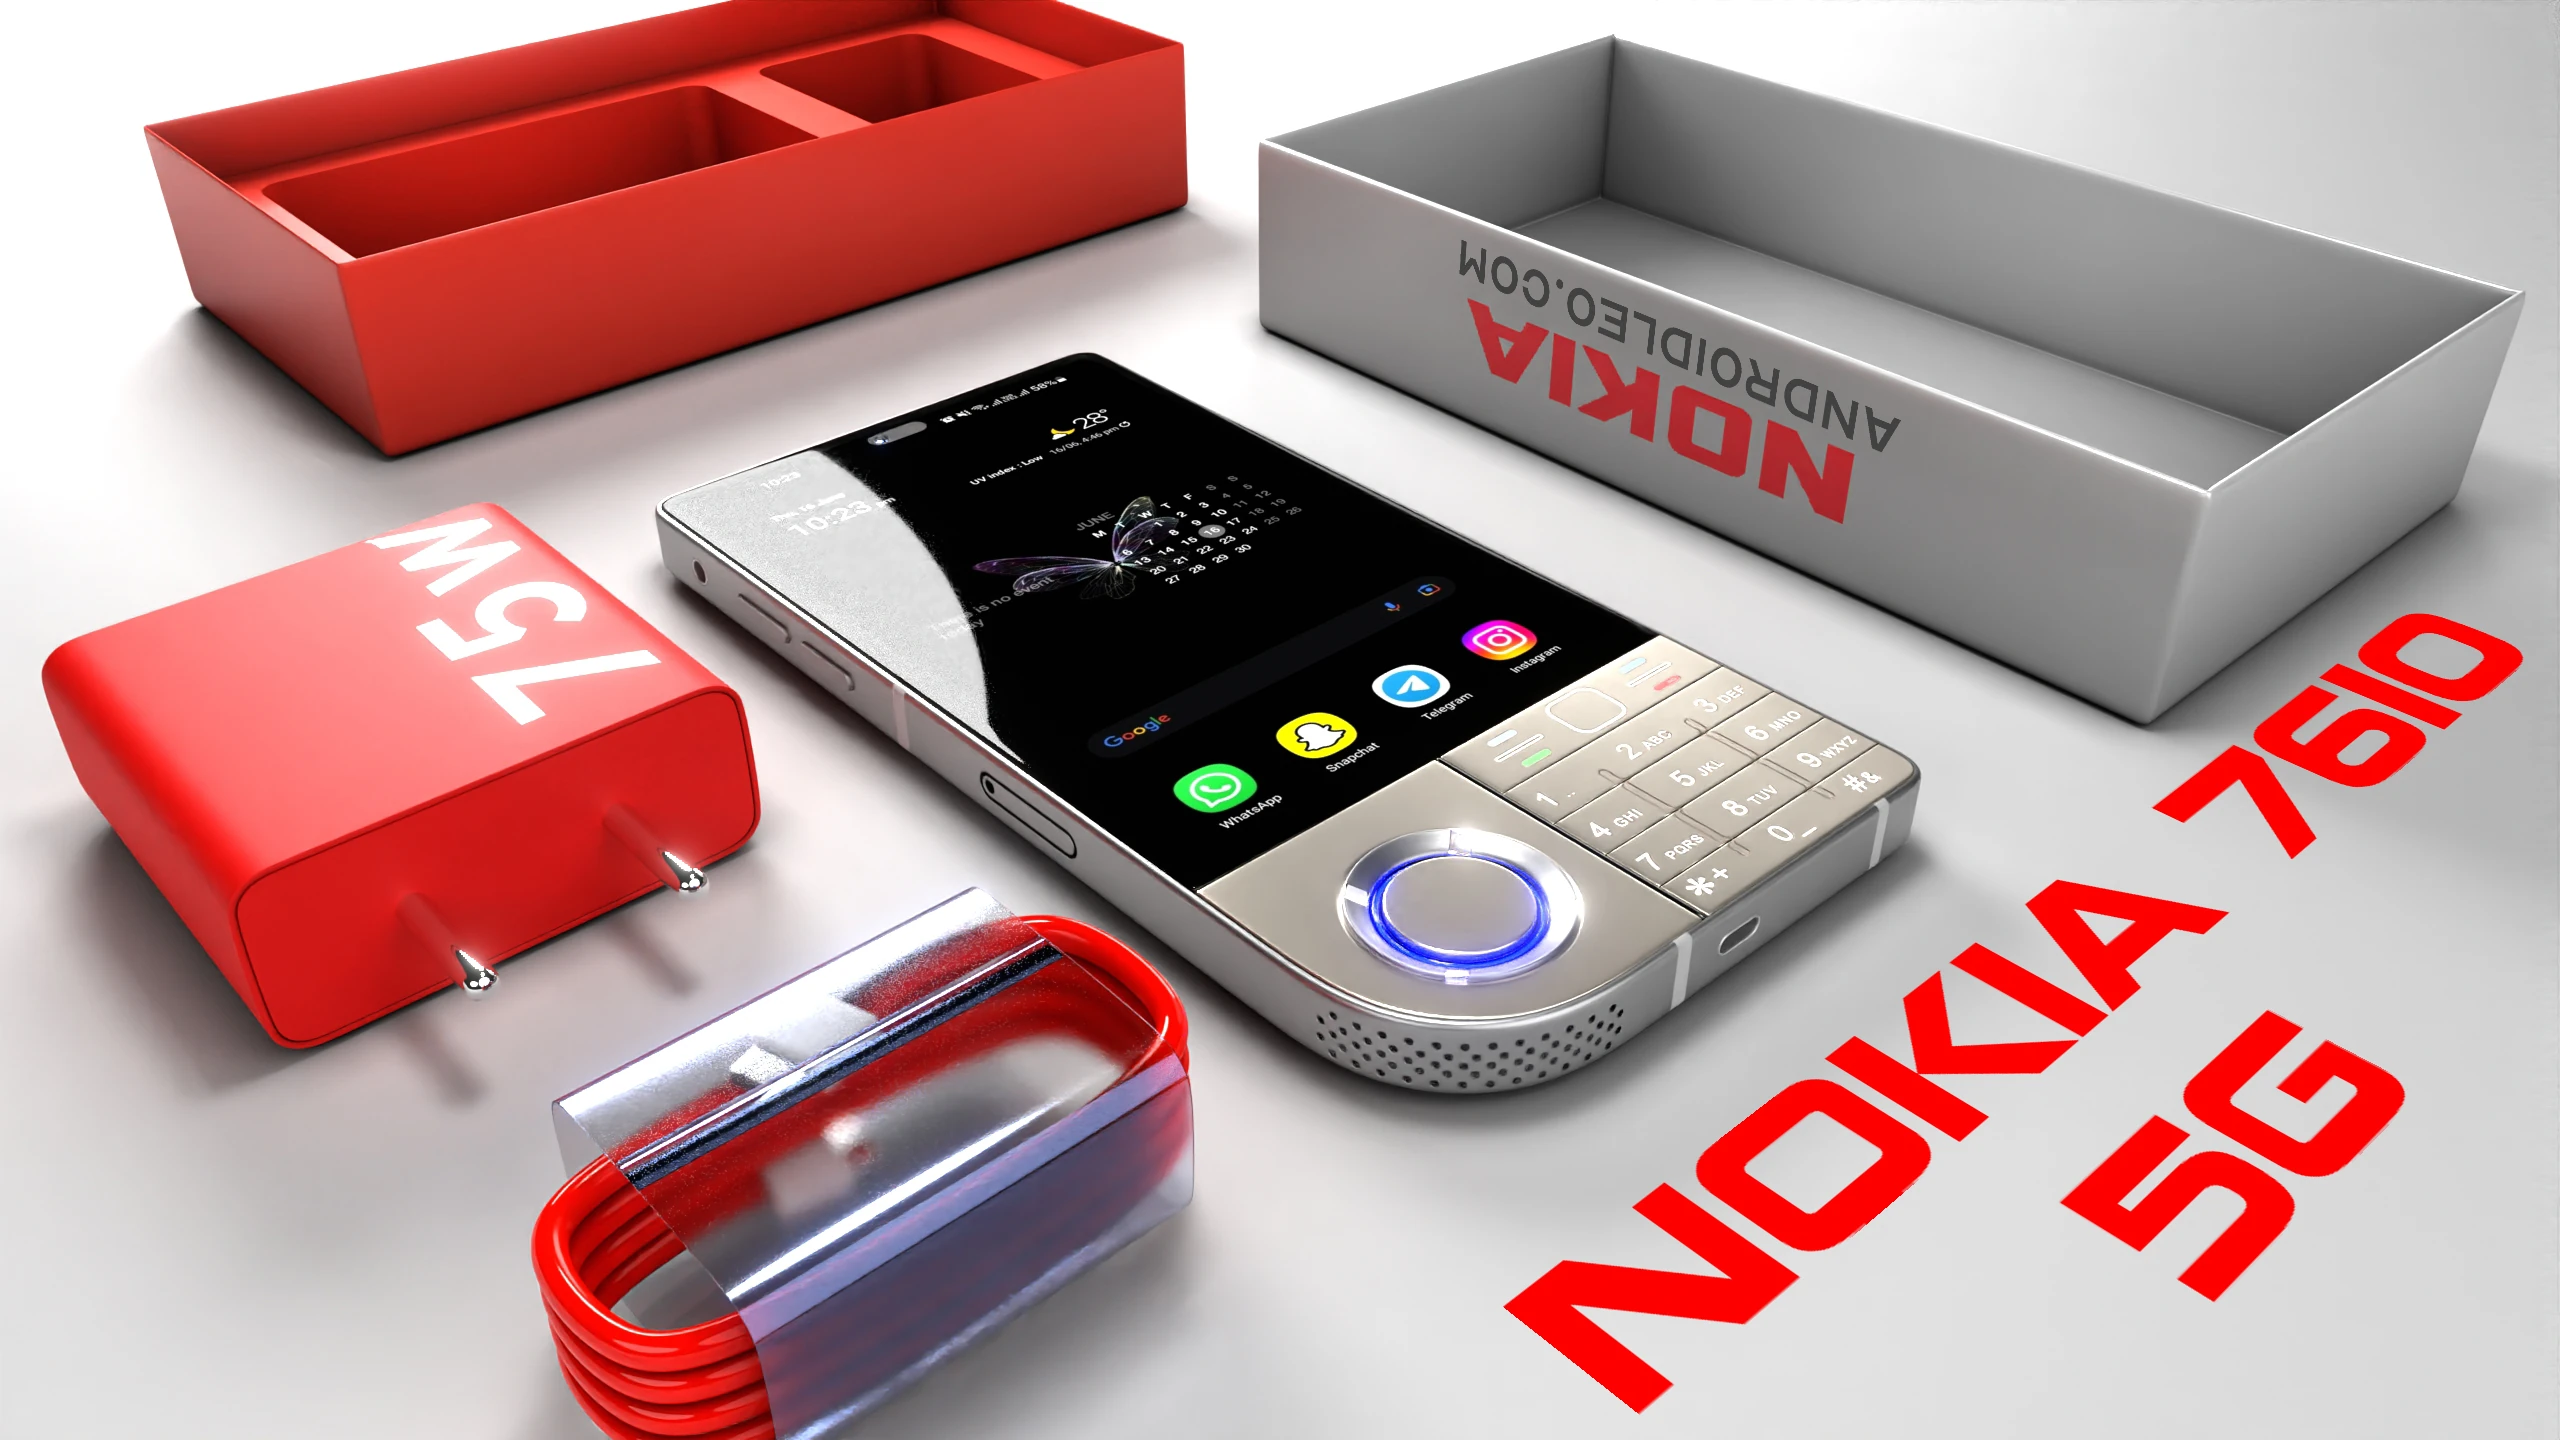 Nokia 7610 5G – specifications, Unboxing, Release Date, Price